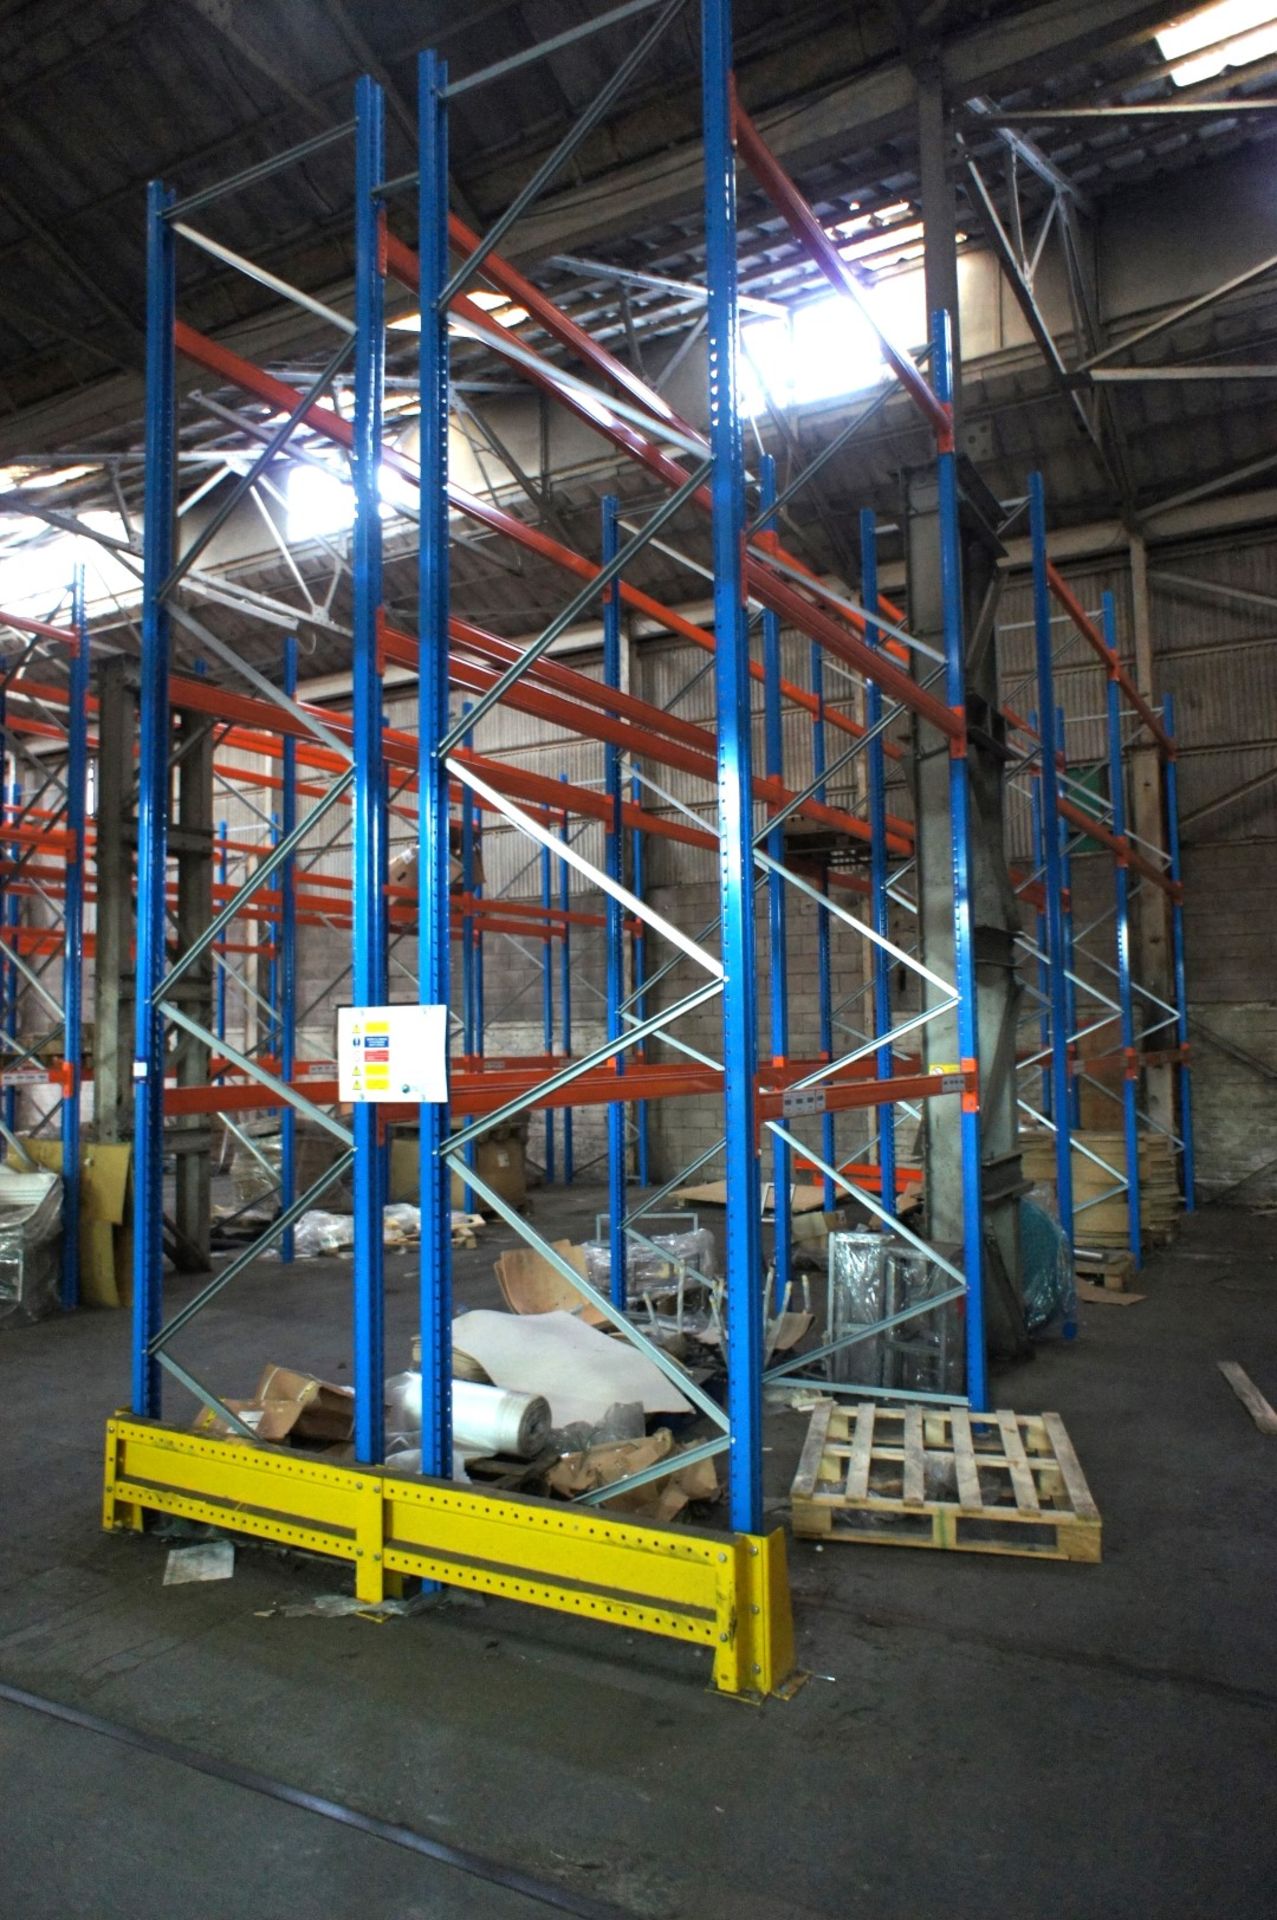 * 6 Bays H Slow 12 Pallet Racking comprising 9 x 5000mm uprights, 24 x 3300mm cross beams and 12 x